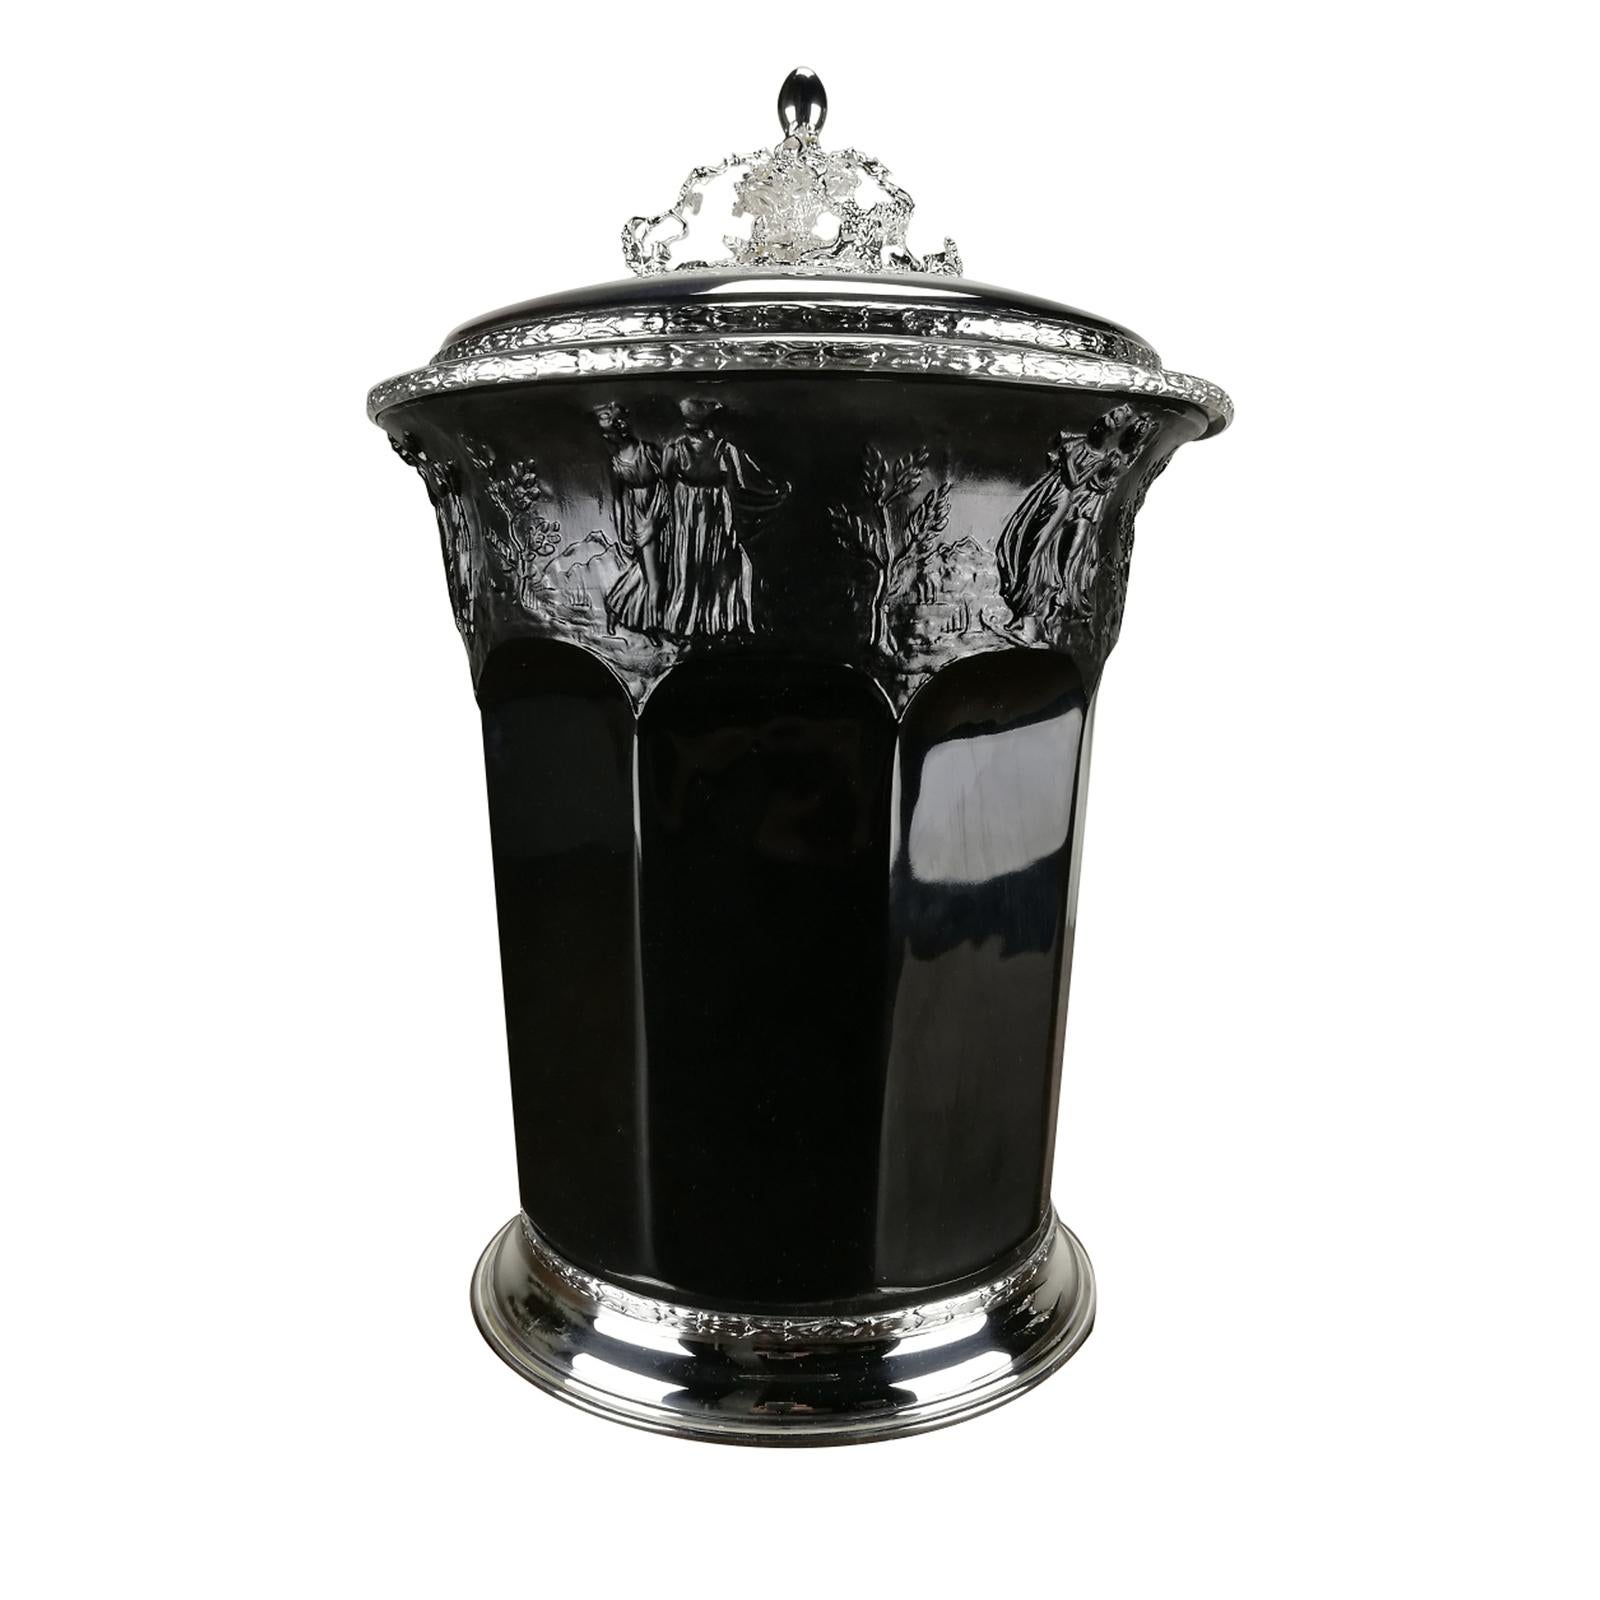 This magnificent piece is an ice bucket that can also be used as a container to chill a champagne bottle. Its silhouette is elegant and classic, adorned with a charming bas-relief and its body is made of biscuit porcelain (which means that the